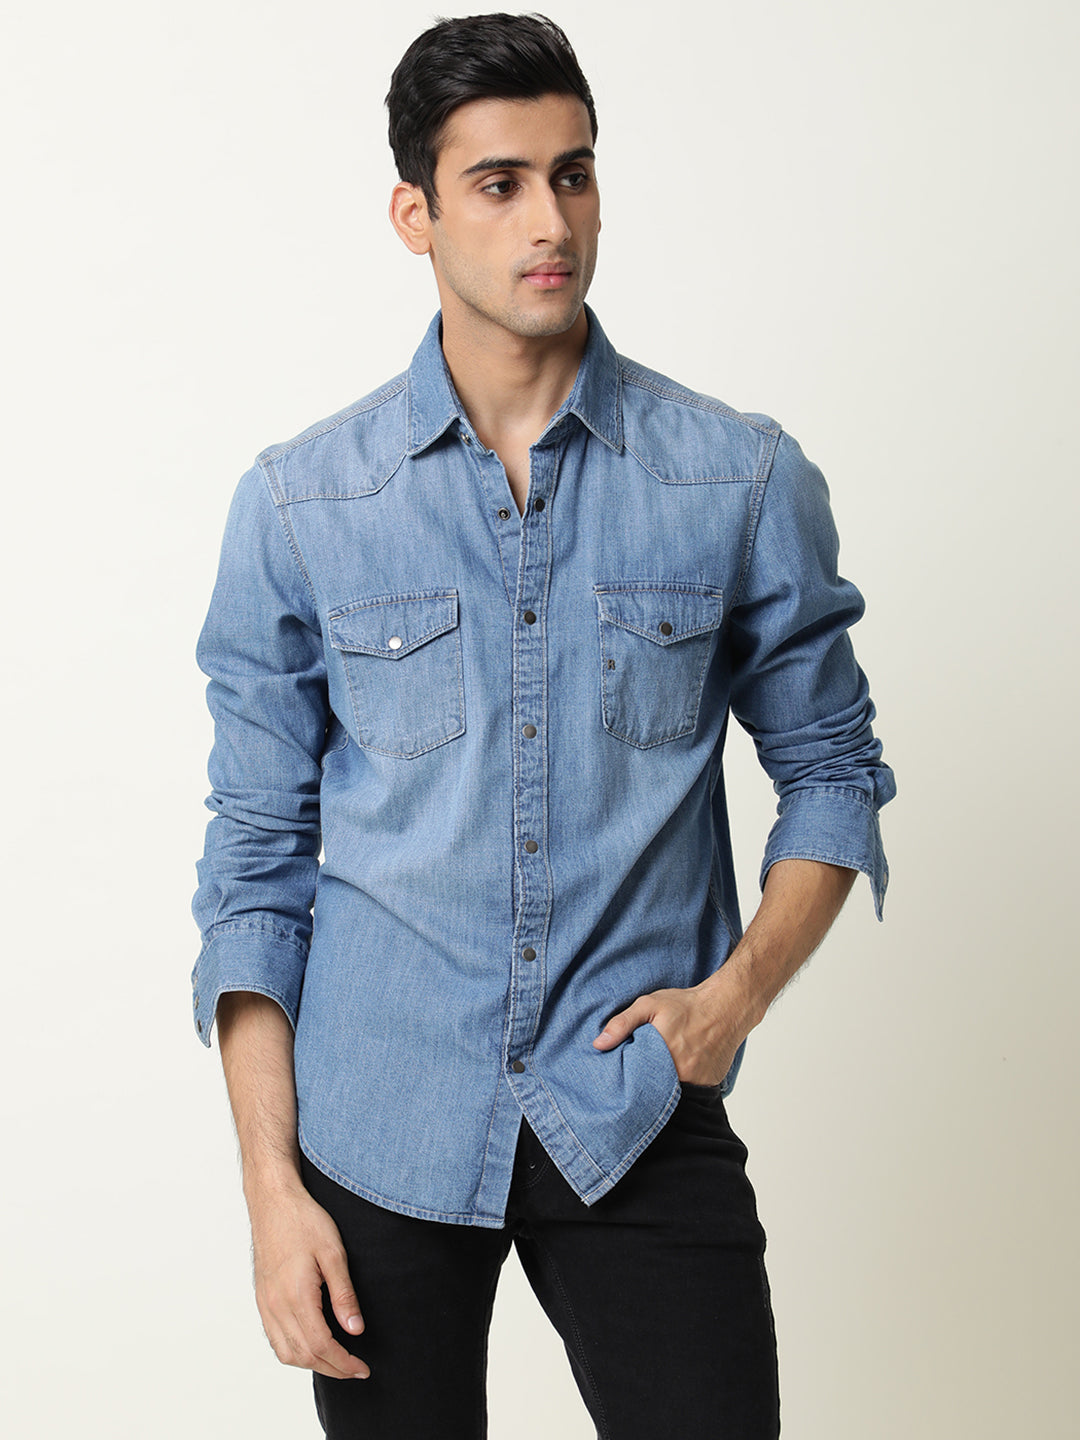 Buy ONLY Blue Washed Denim Shirt - Shirts for Women 1430847 | Myntra